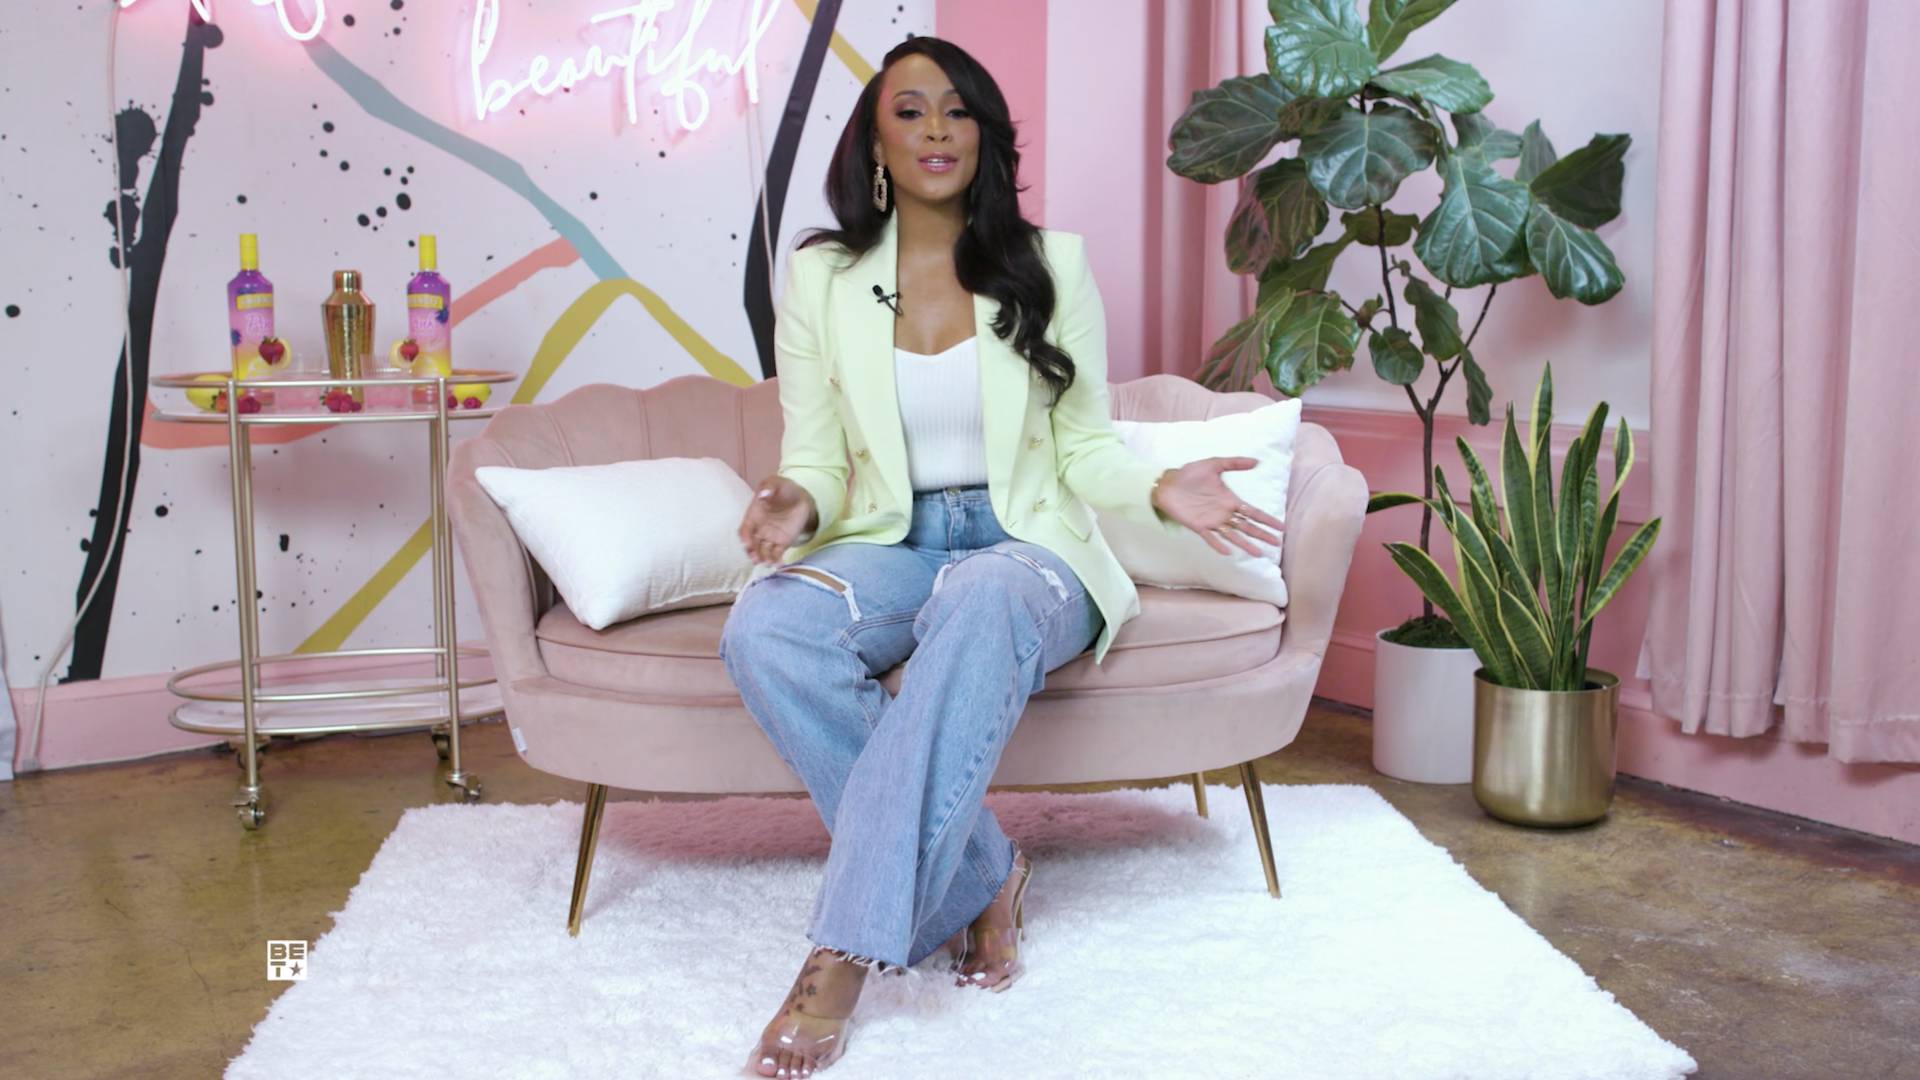 Amanda Booz in jeans, a white shirt and neon yellow blazer, sitting on a pink chair with a colorful background.